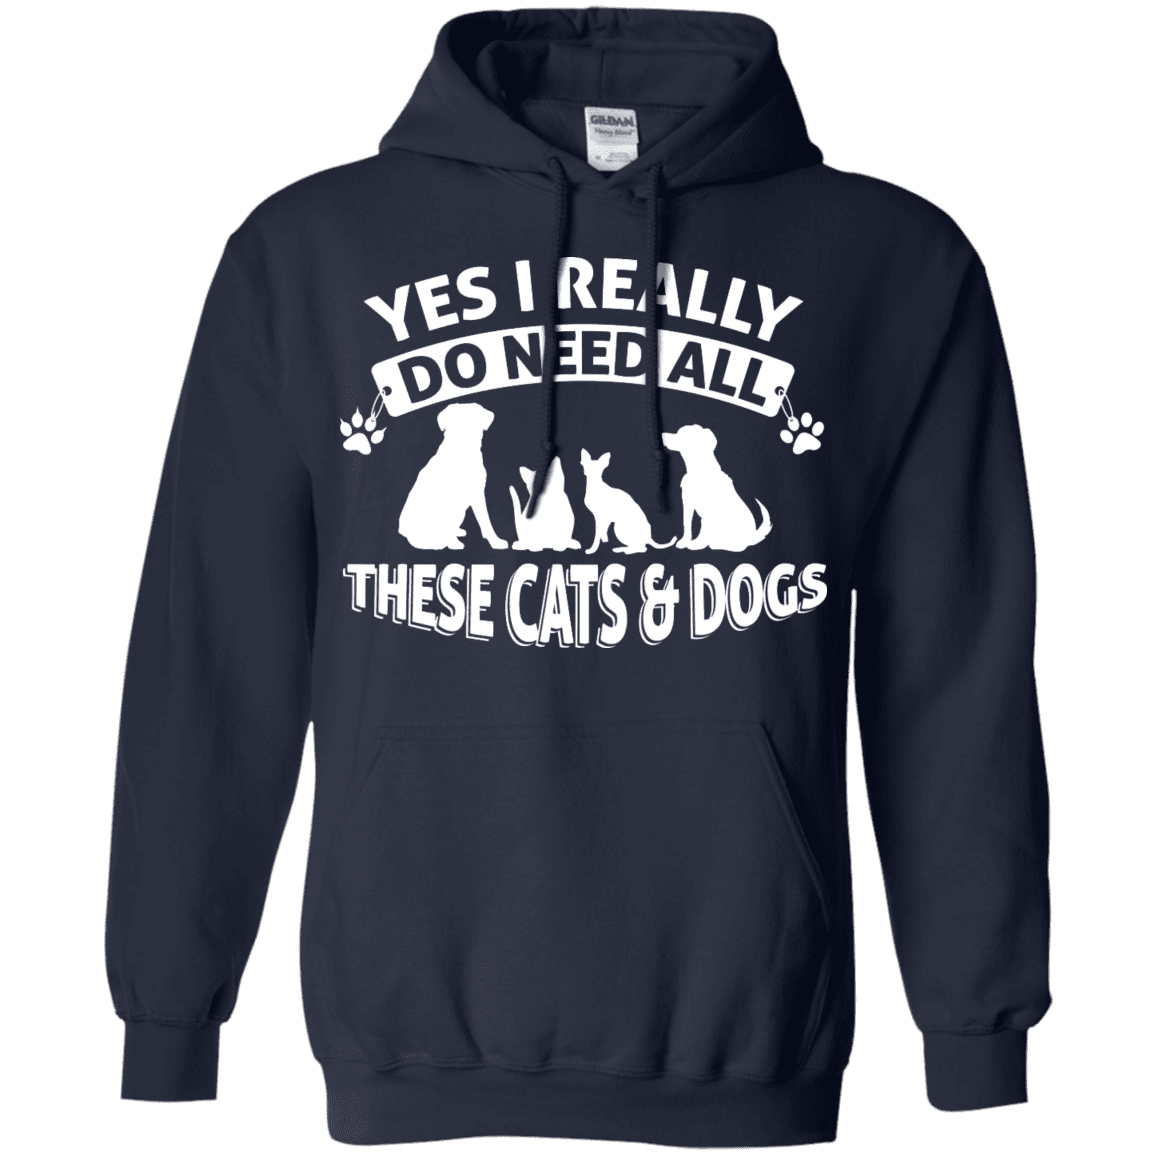 Yes I Need All These Cats and Dogs - Hoodie.